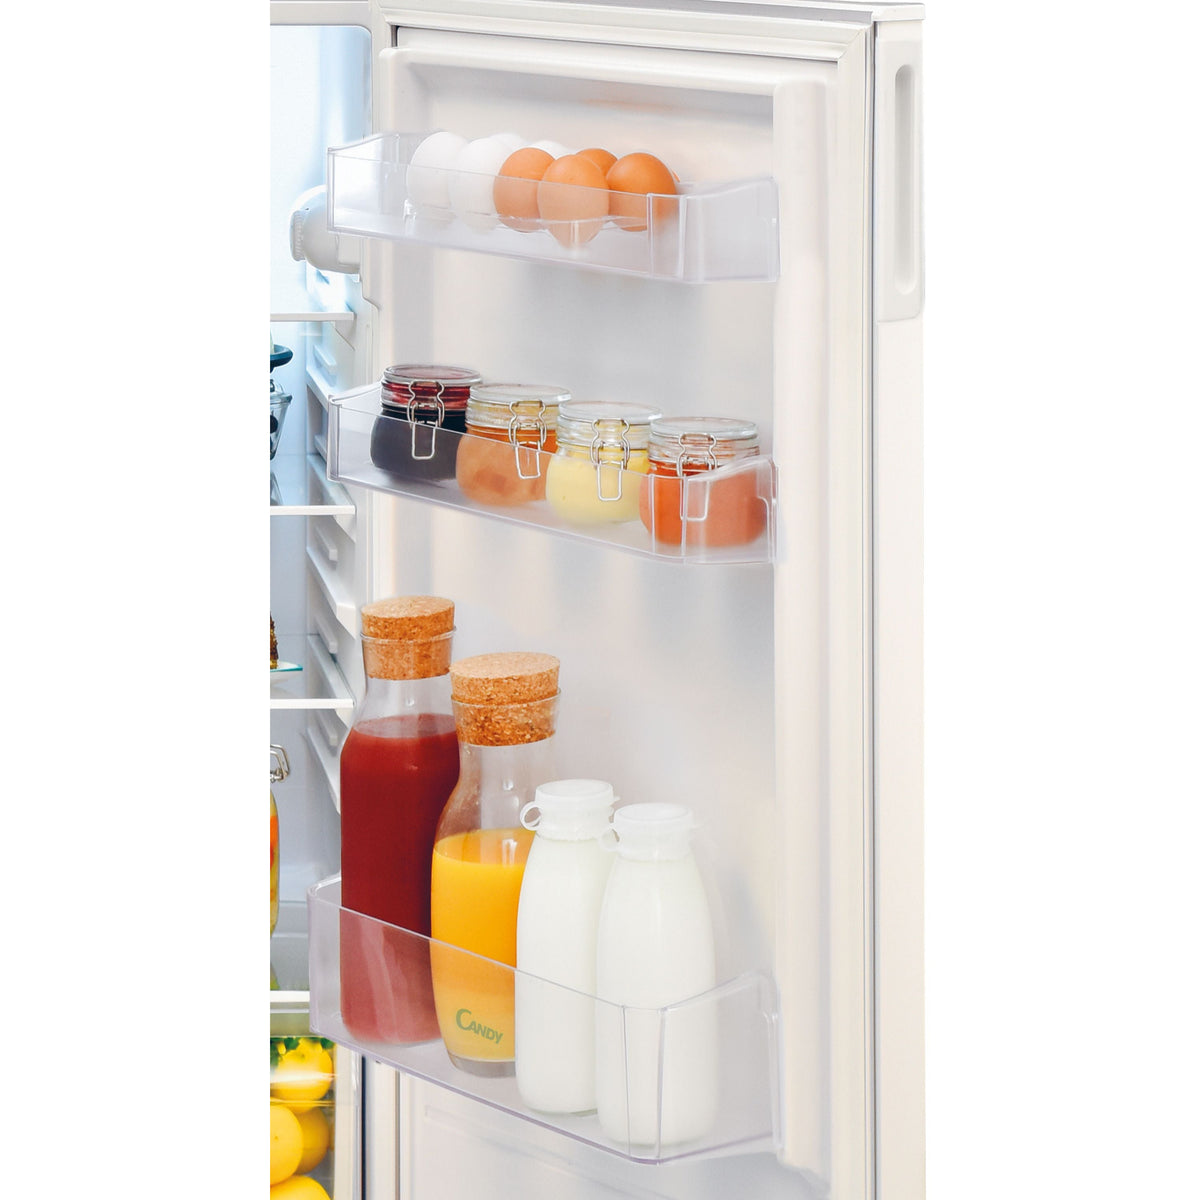 Candy 80/20 213L Freestanding Fridge Freezer - White | CDV1S514FWK from Candy - DID Electrical